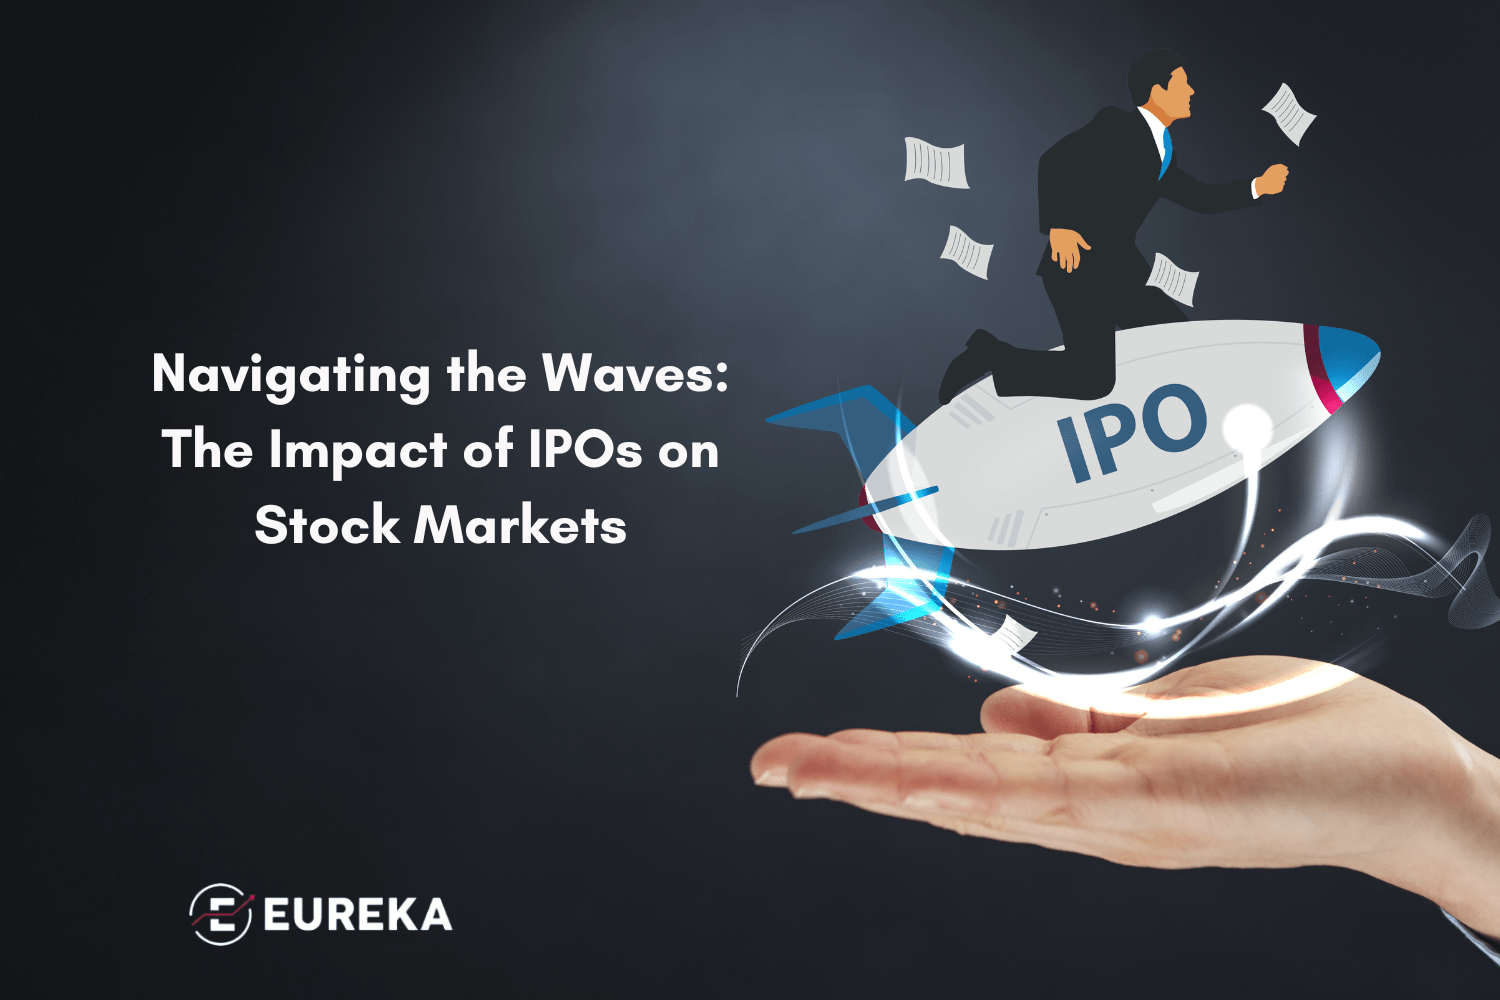 Navigating the Waves: The Impact of IPOs on Stock Markets